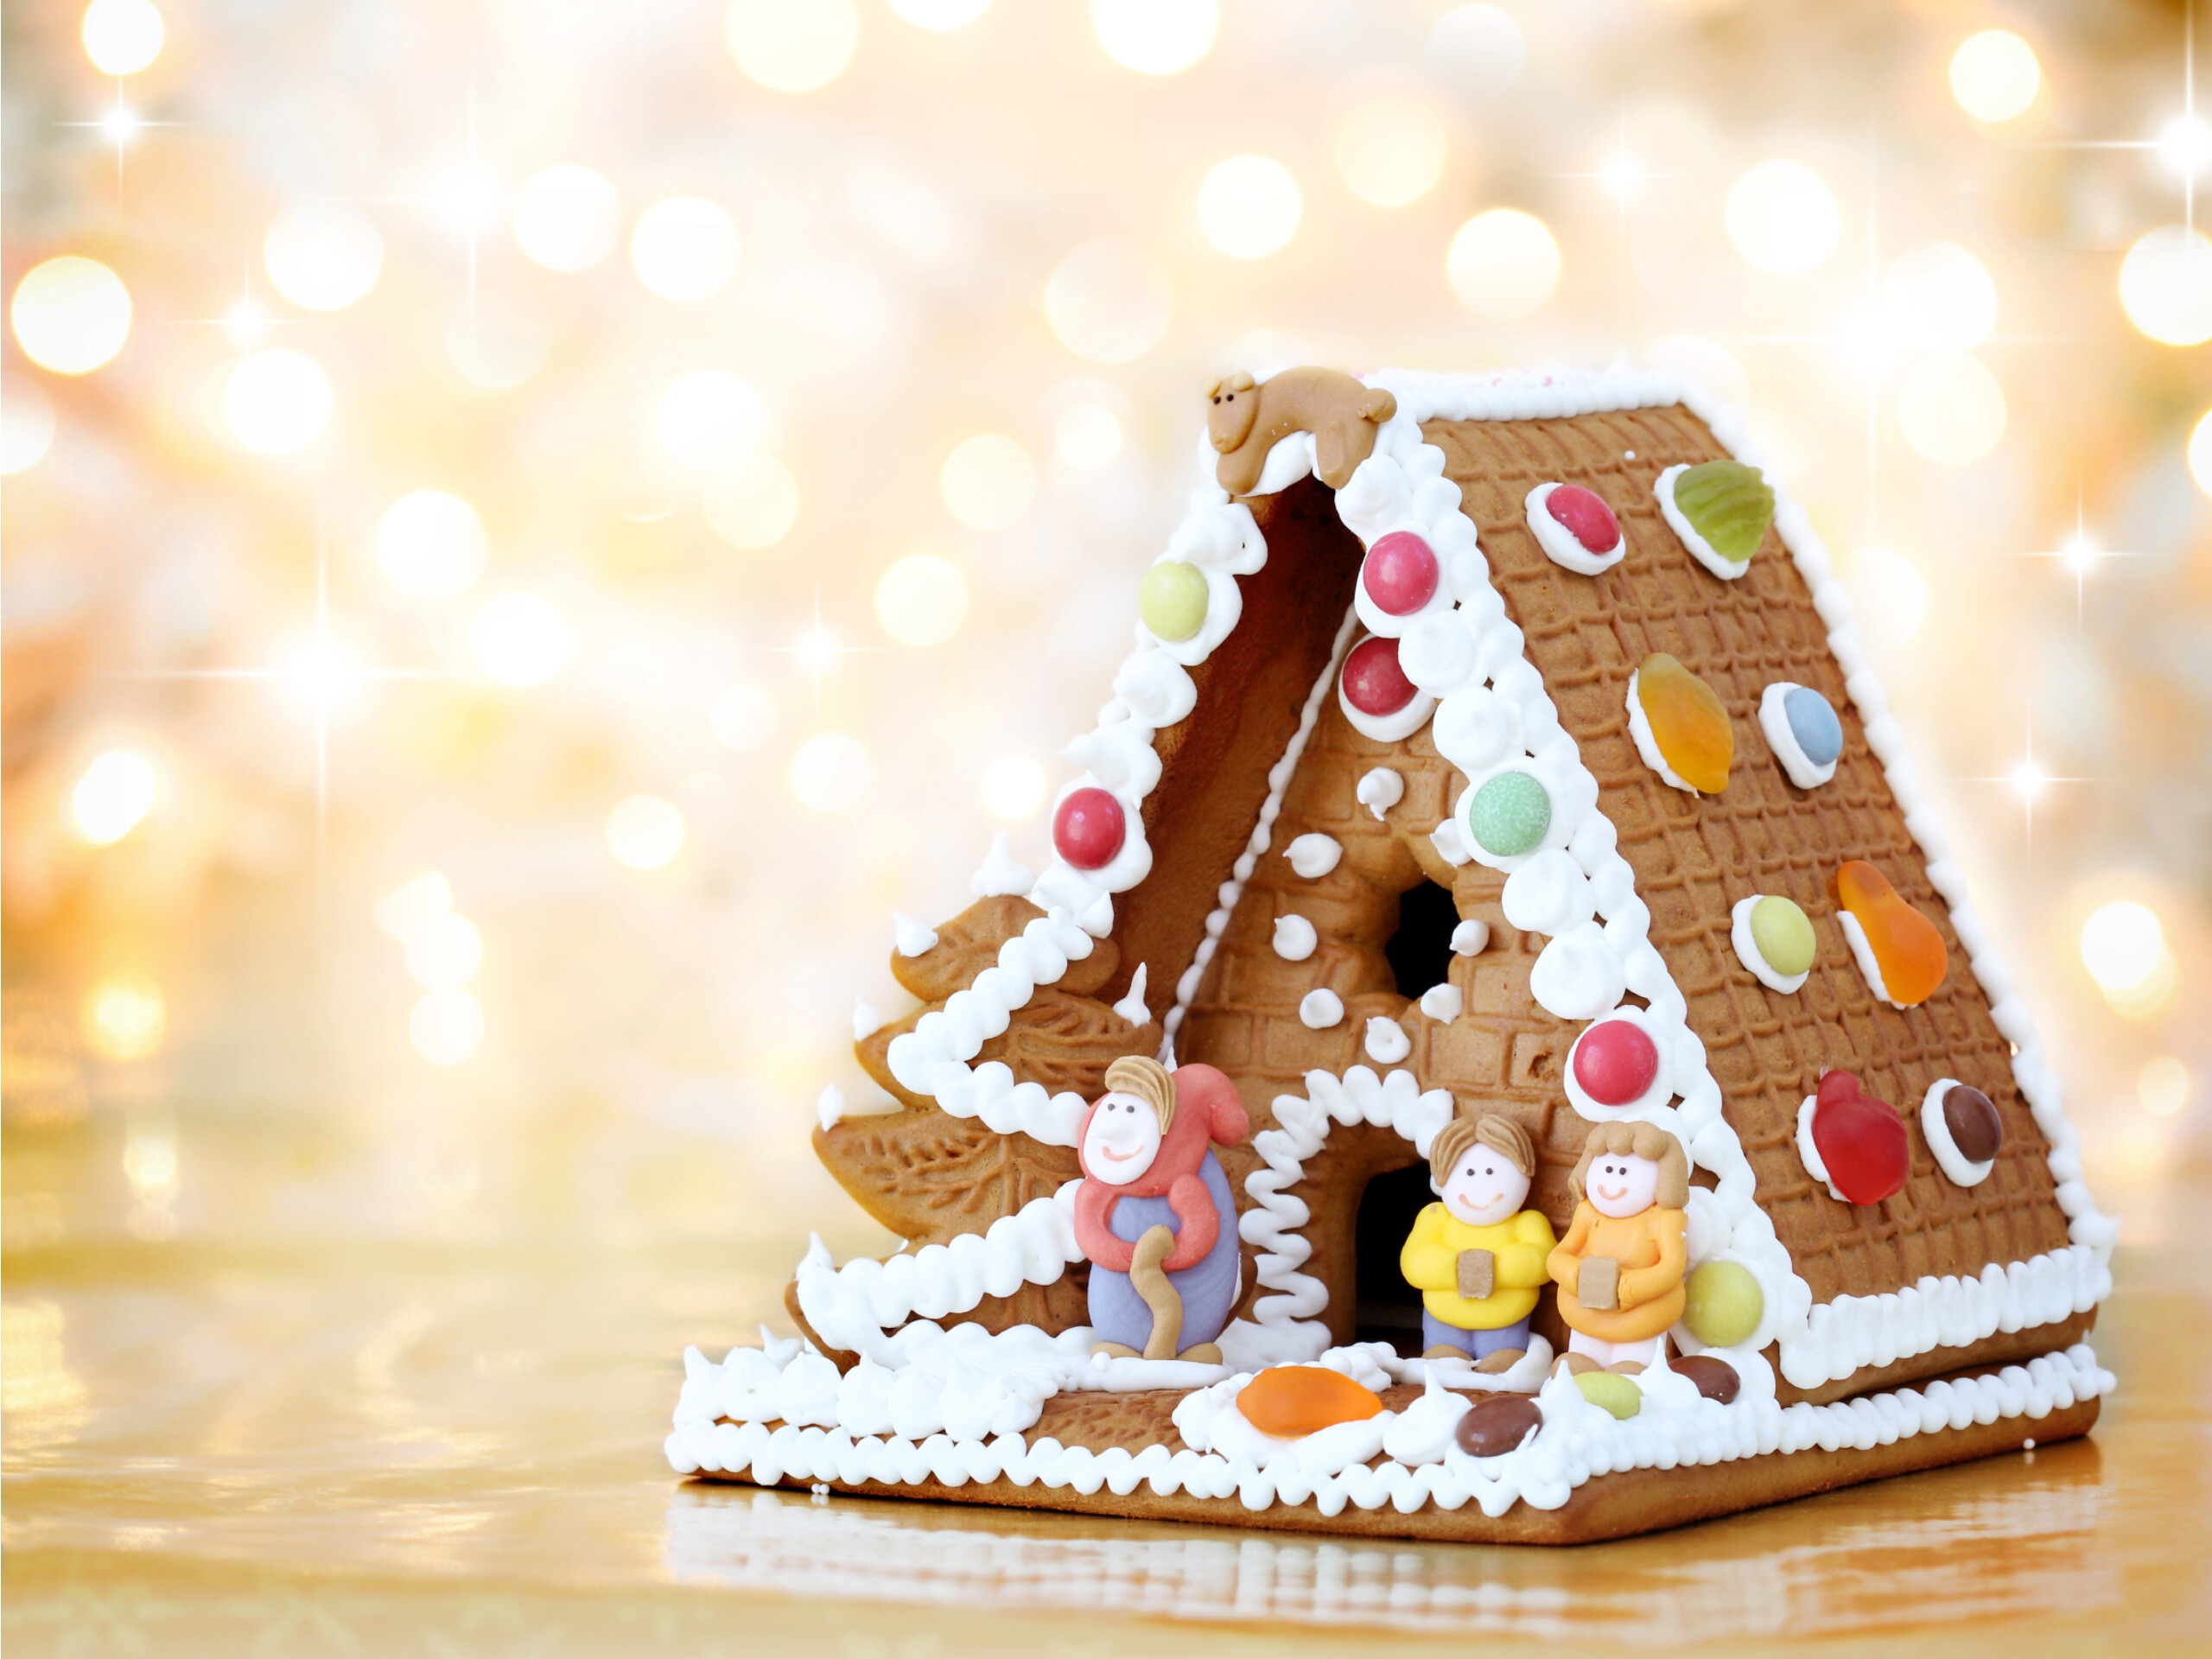 Gingerbread House: Edible statuettes and decorations, Gingerbread bakers, Candies for decorating, Gumdrops. 2560x1920 HD Wallpaper.